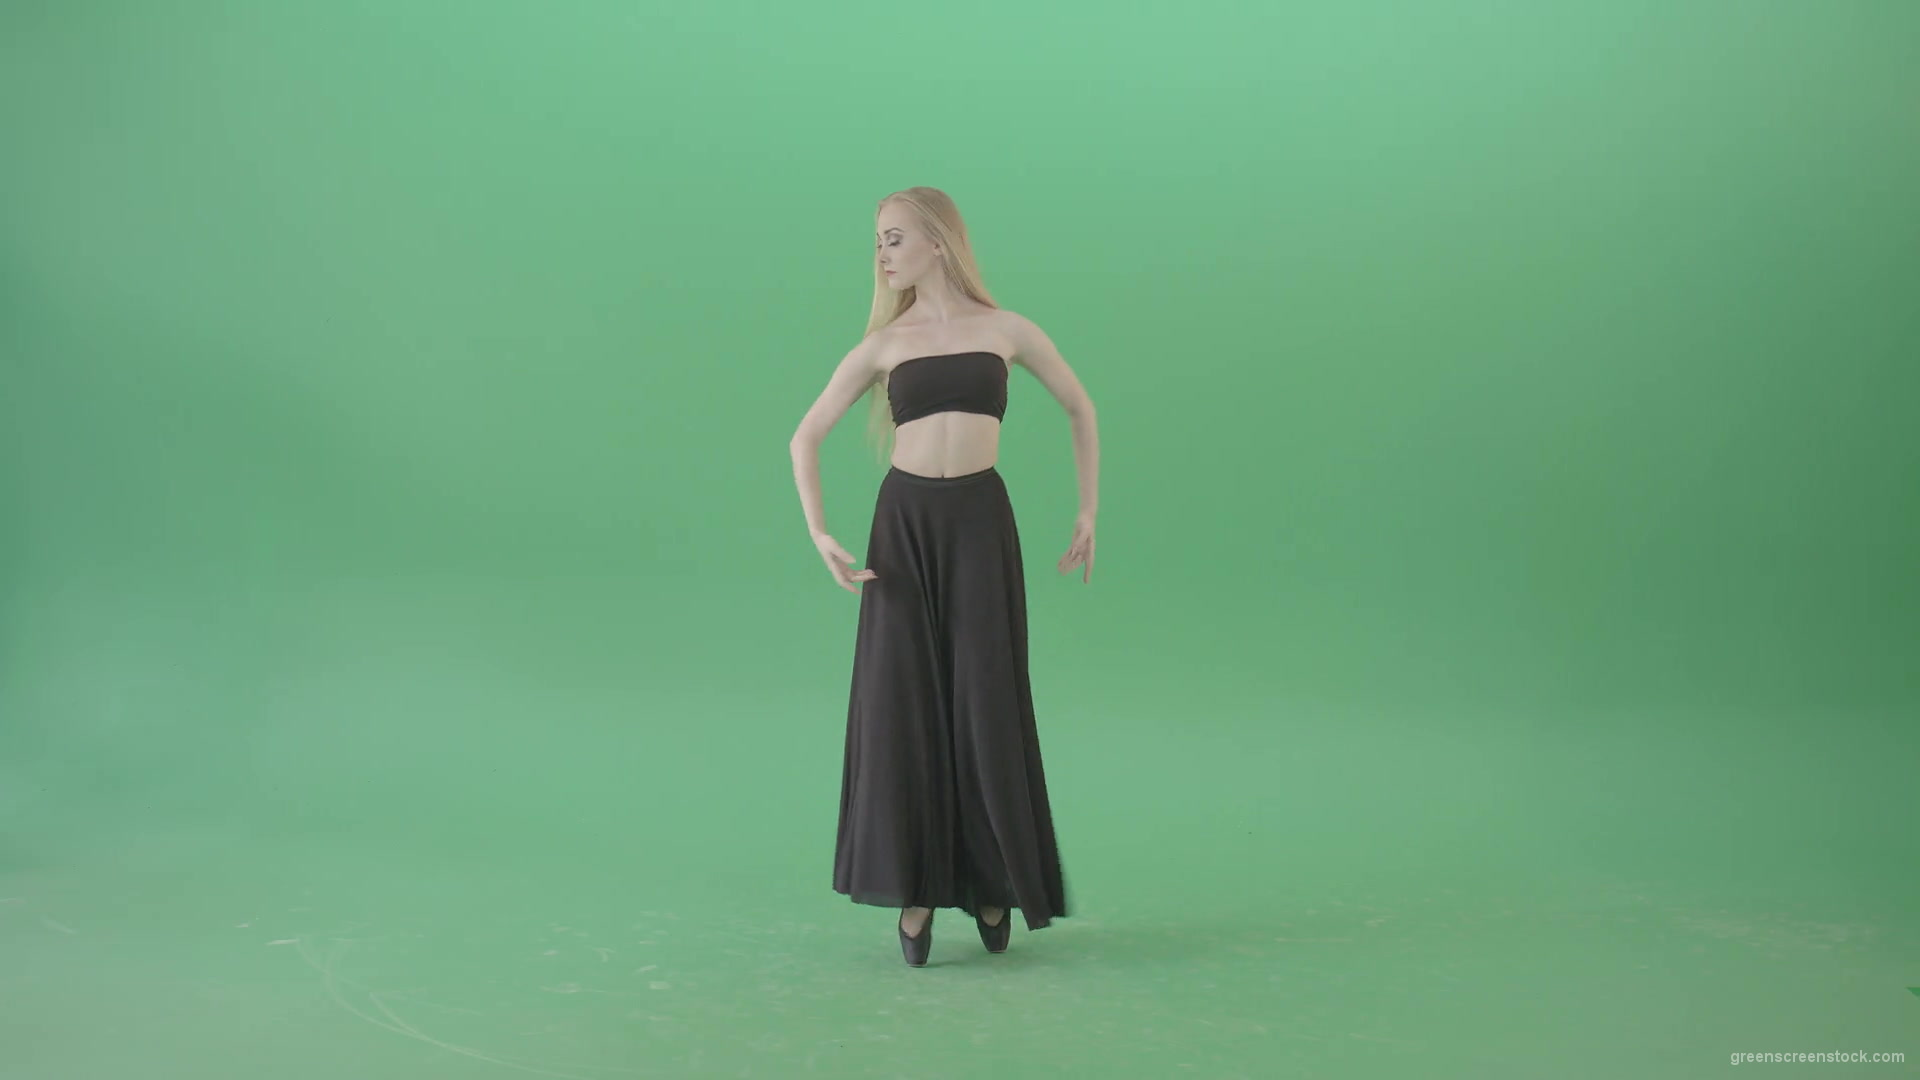 Dancing-in-the-shadow-spinning-on-the-green-screen-ballet-art-by-dancing-girl-4K-Video-Footage-1920_002 Green Screen Stock